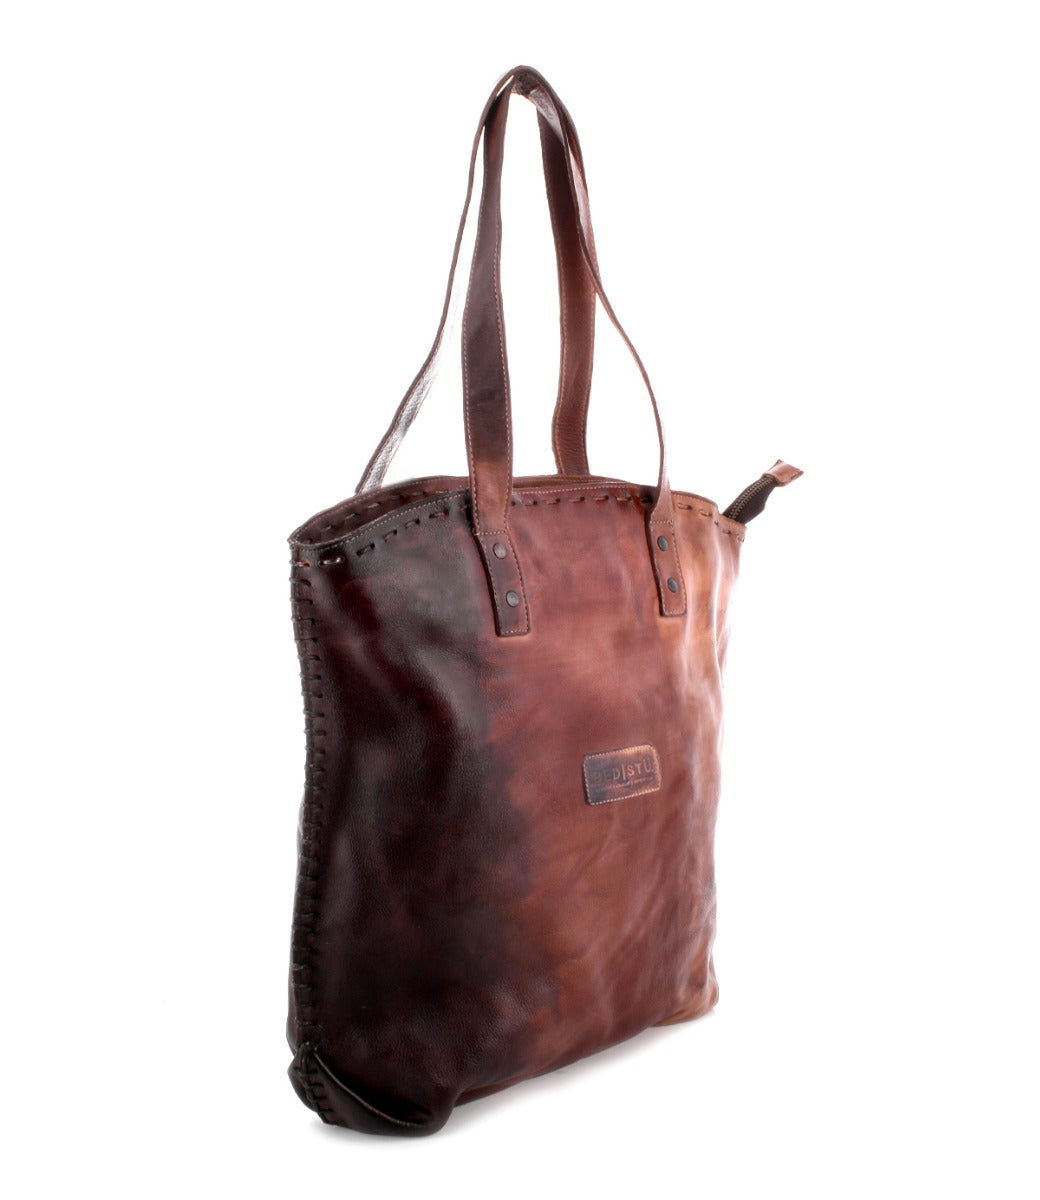 A Skye II brown leather tote bag on a white background by Bed Stu.